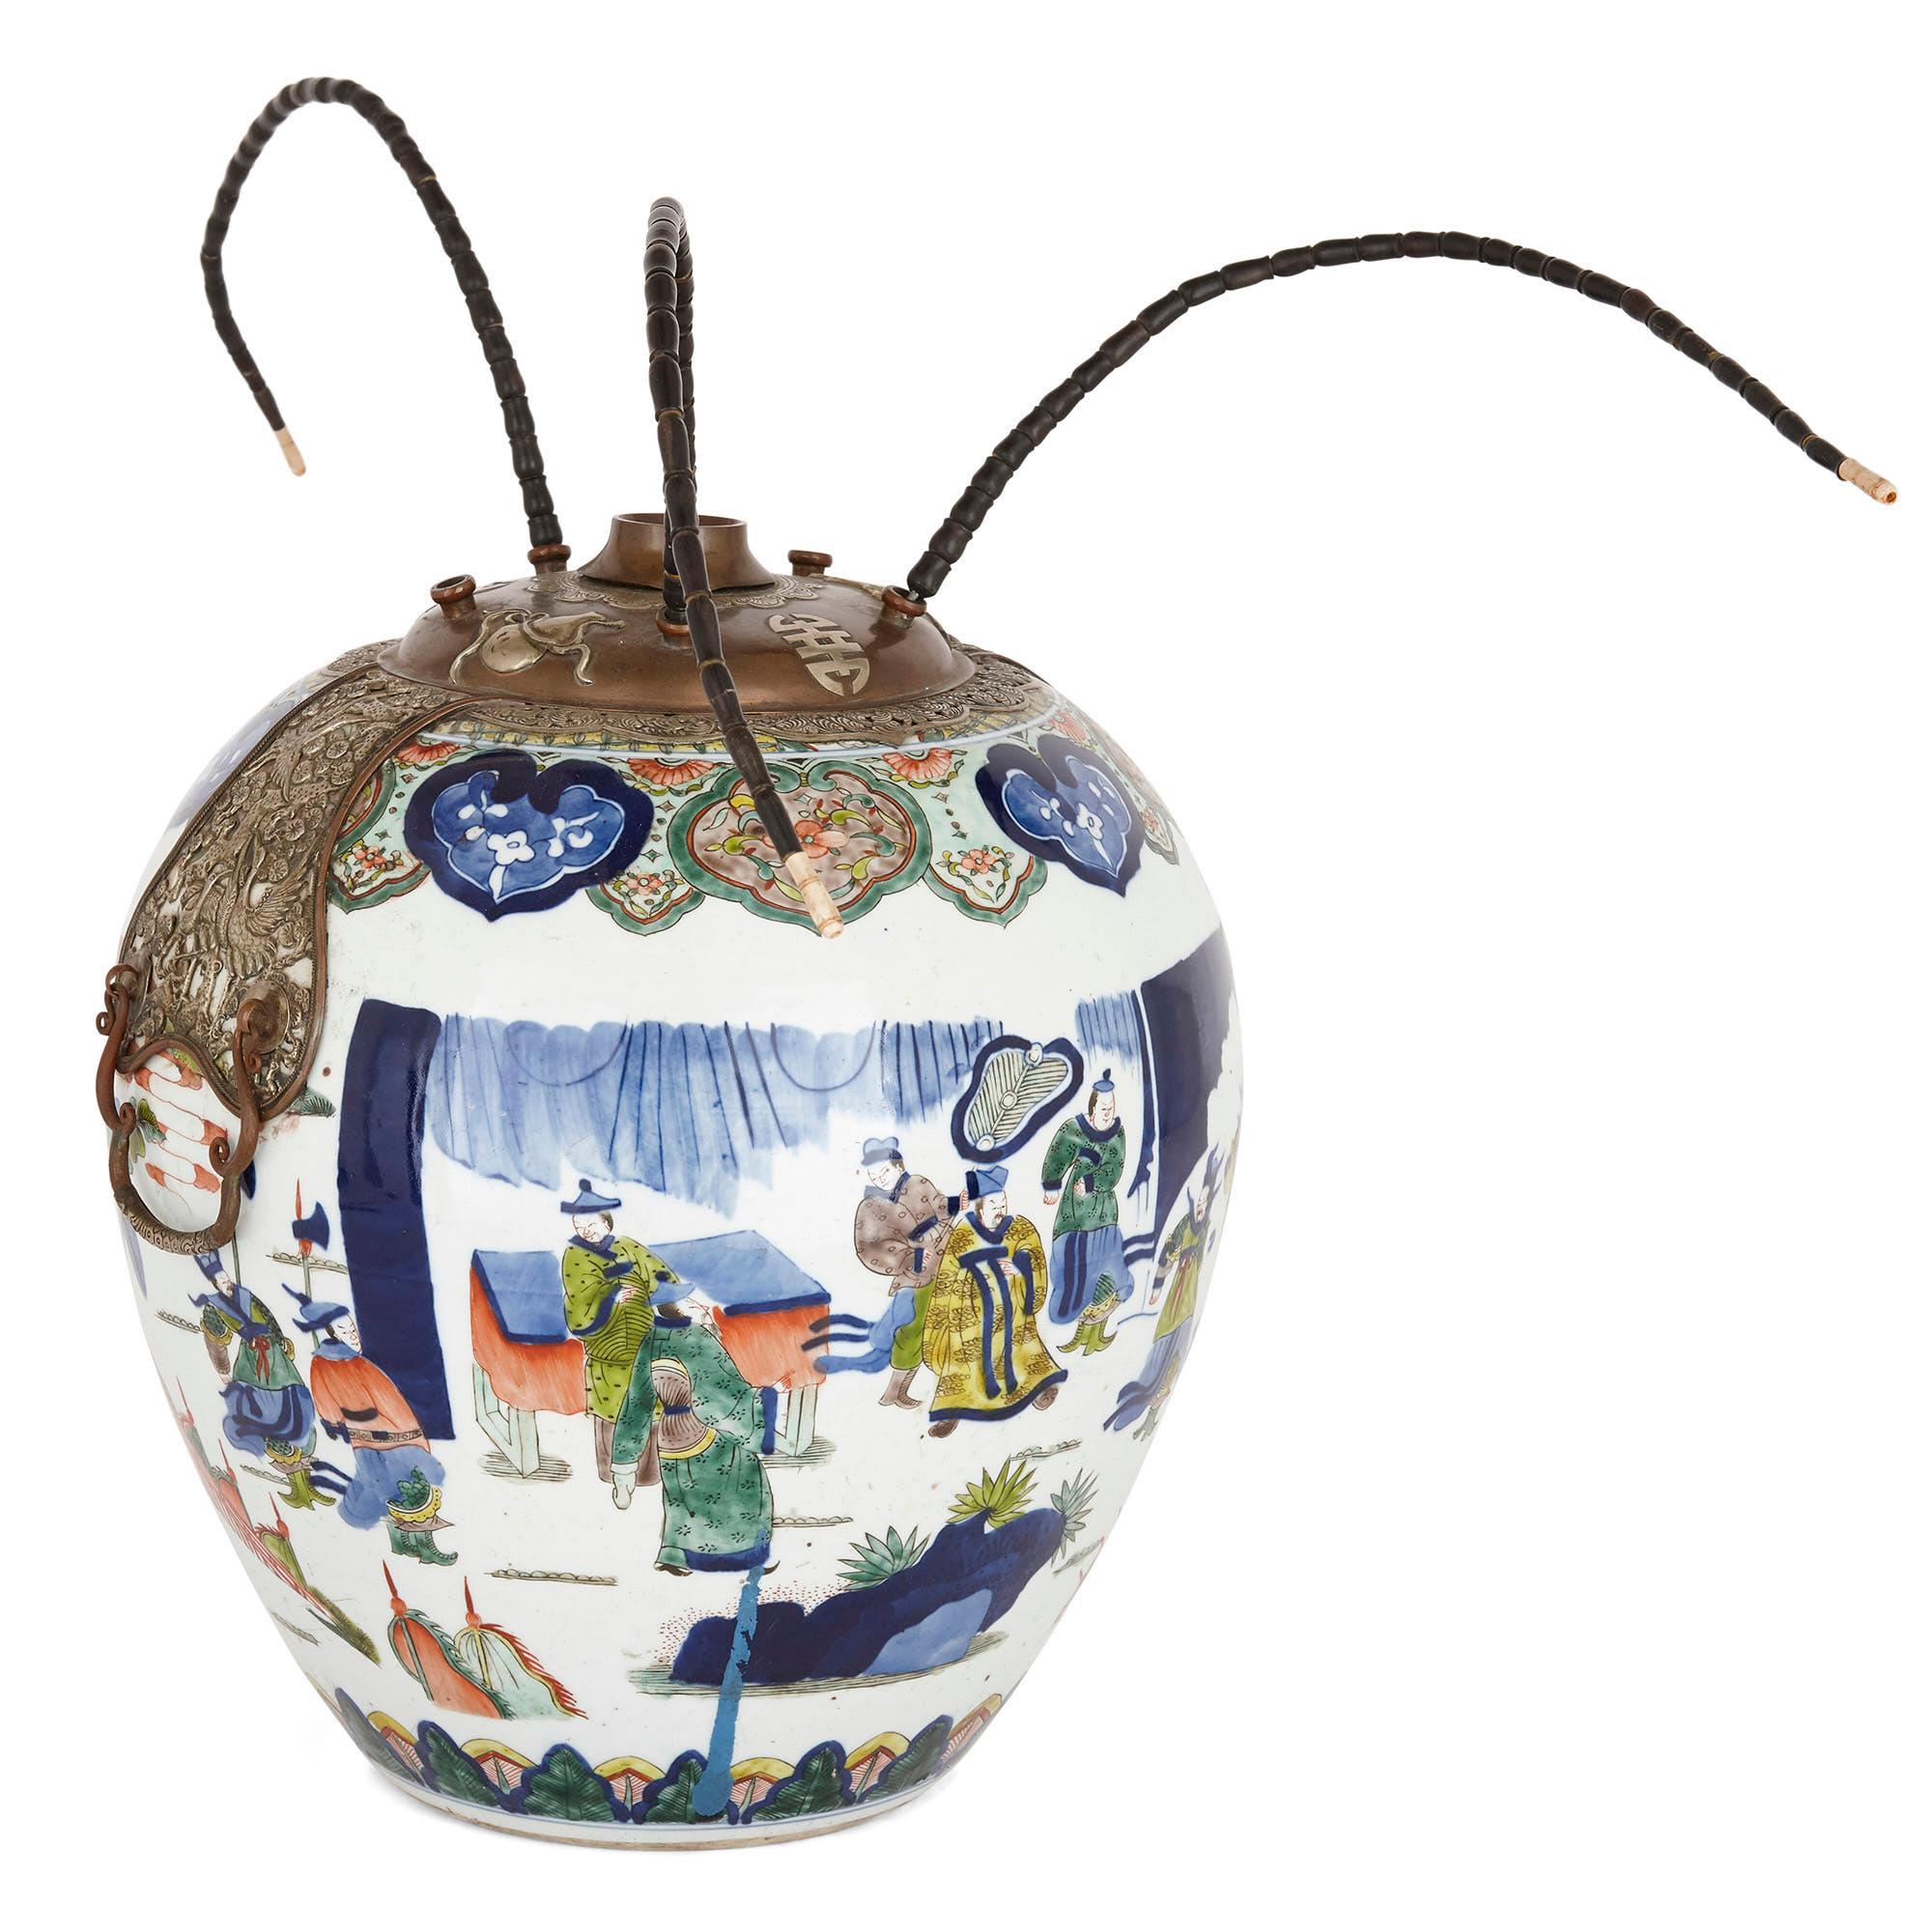 19th century Chinese porcelain opium jar 
china, 19th century 
Measures: Height 38cm, diameter 35cm

This 19th century porcelain opium jar, formed in a traditional vase shape, is decorated in the 17th Century Wucai style. The body features a